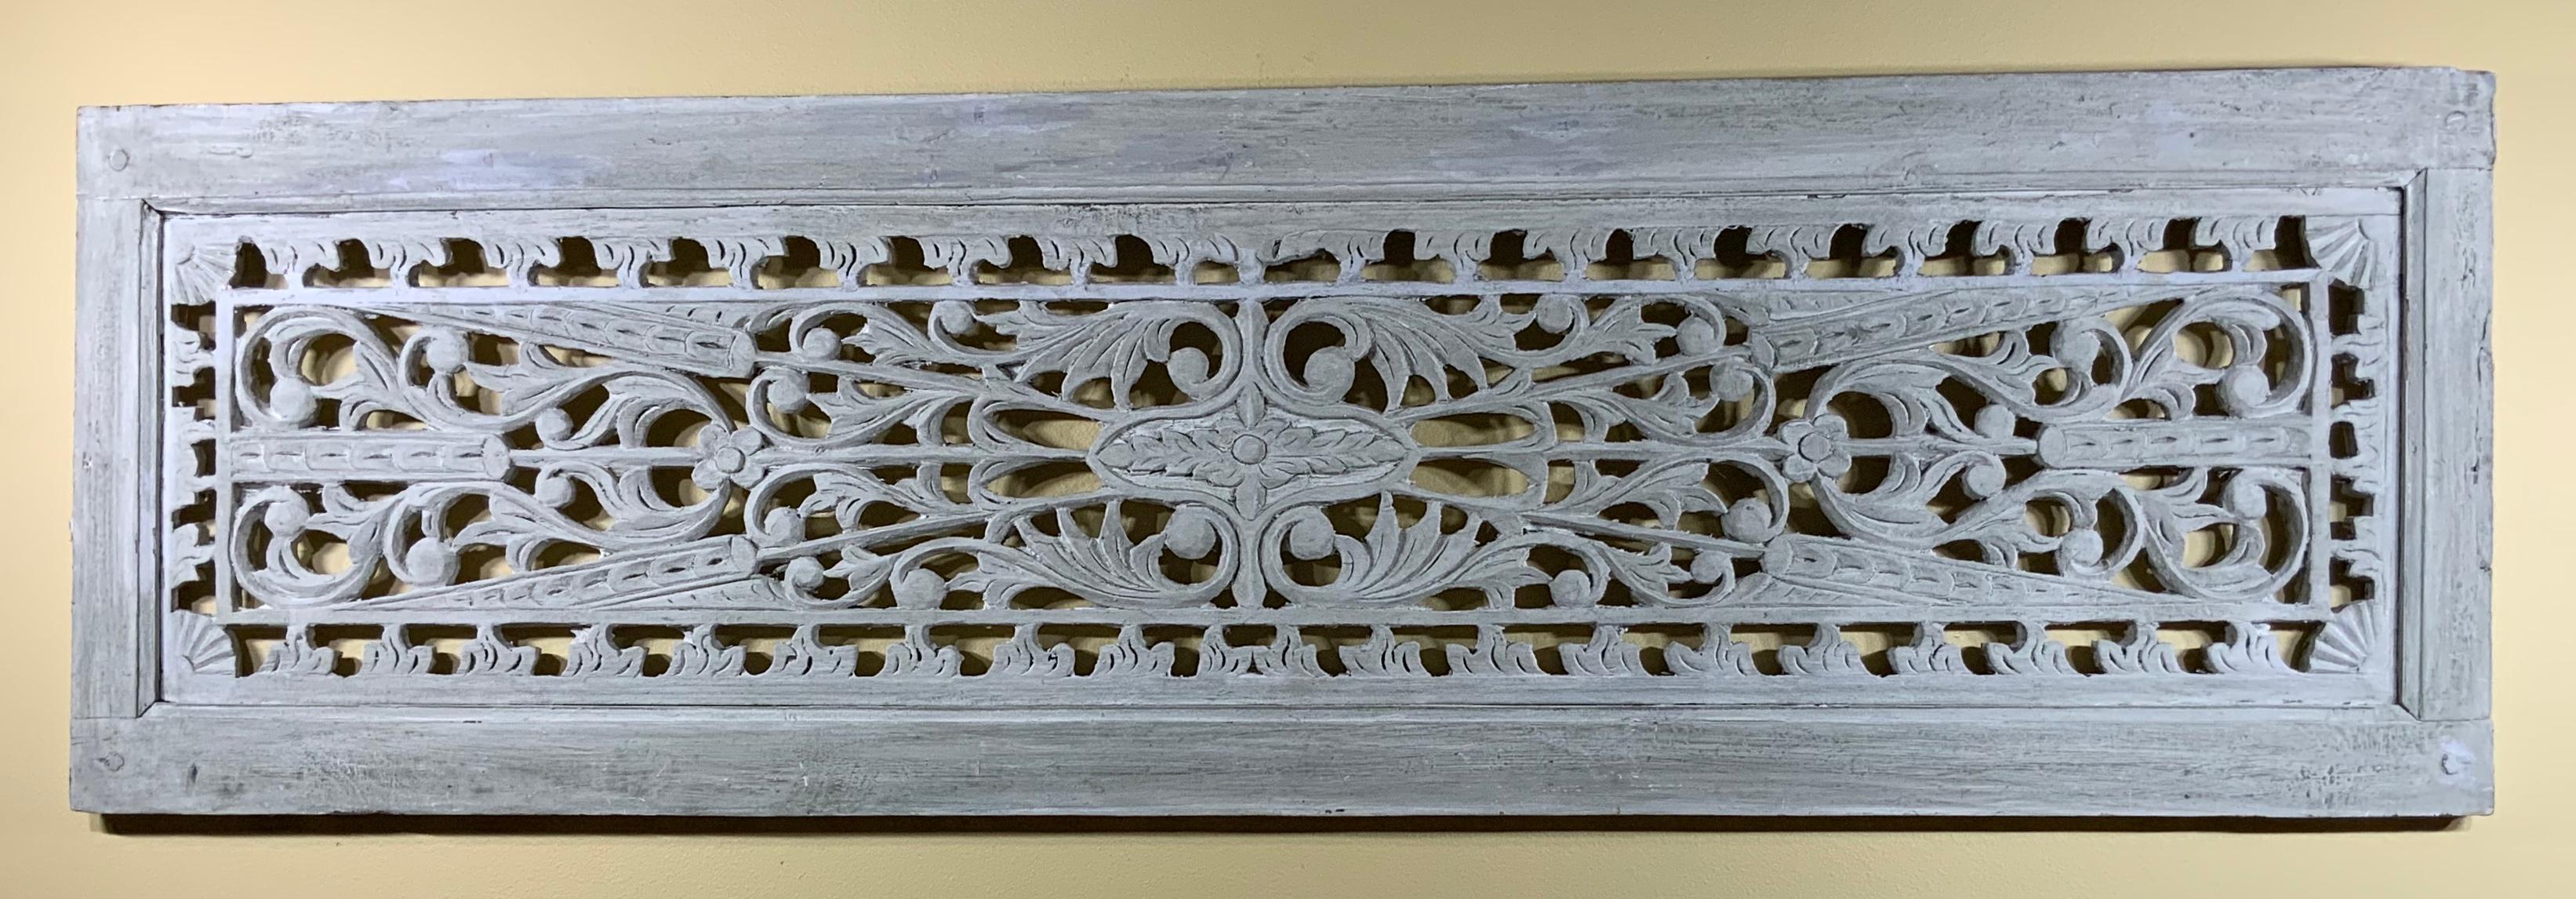 Beautiful wood hand carving wall hanging from solid wood, with vine, flowers and arrows motifs hand painted in gray color. Very impressive wall hanging.